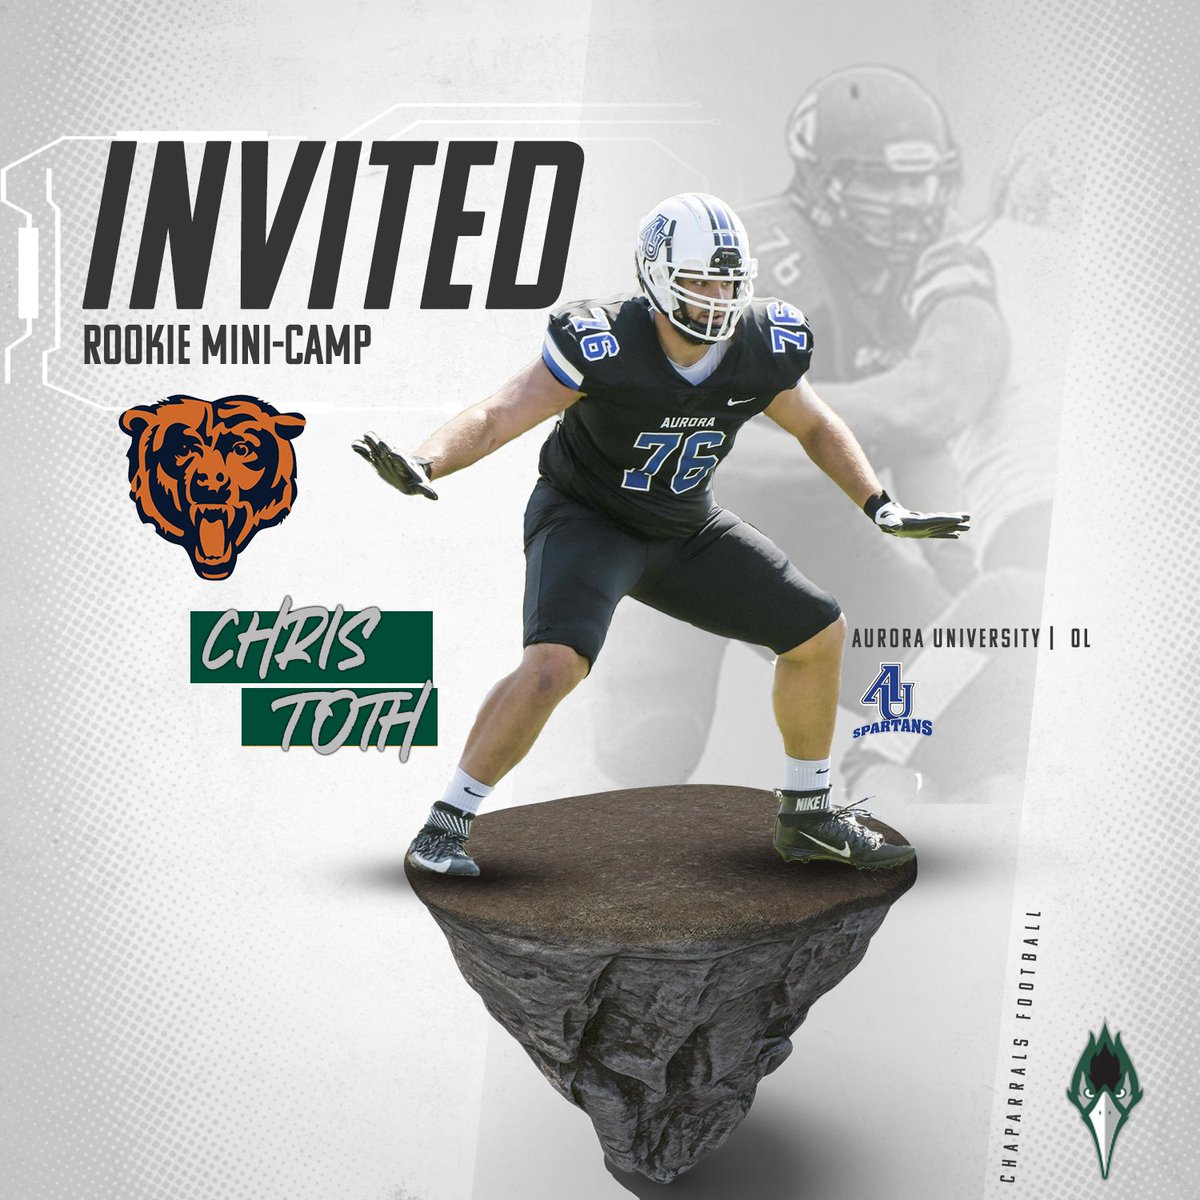 COD➡️AU➡️CHI #LevelUp Another #Chaparral getting the call! Good luck on your opportunity with the @ChicagoBears, @christoth99!